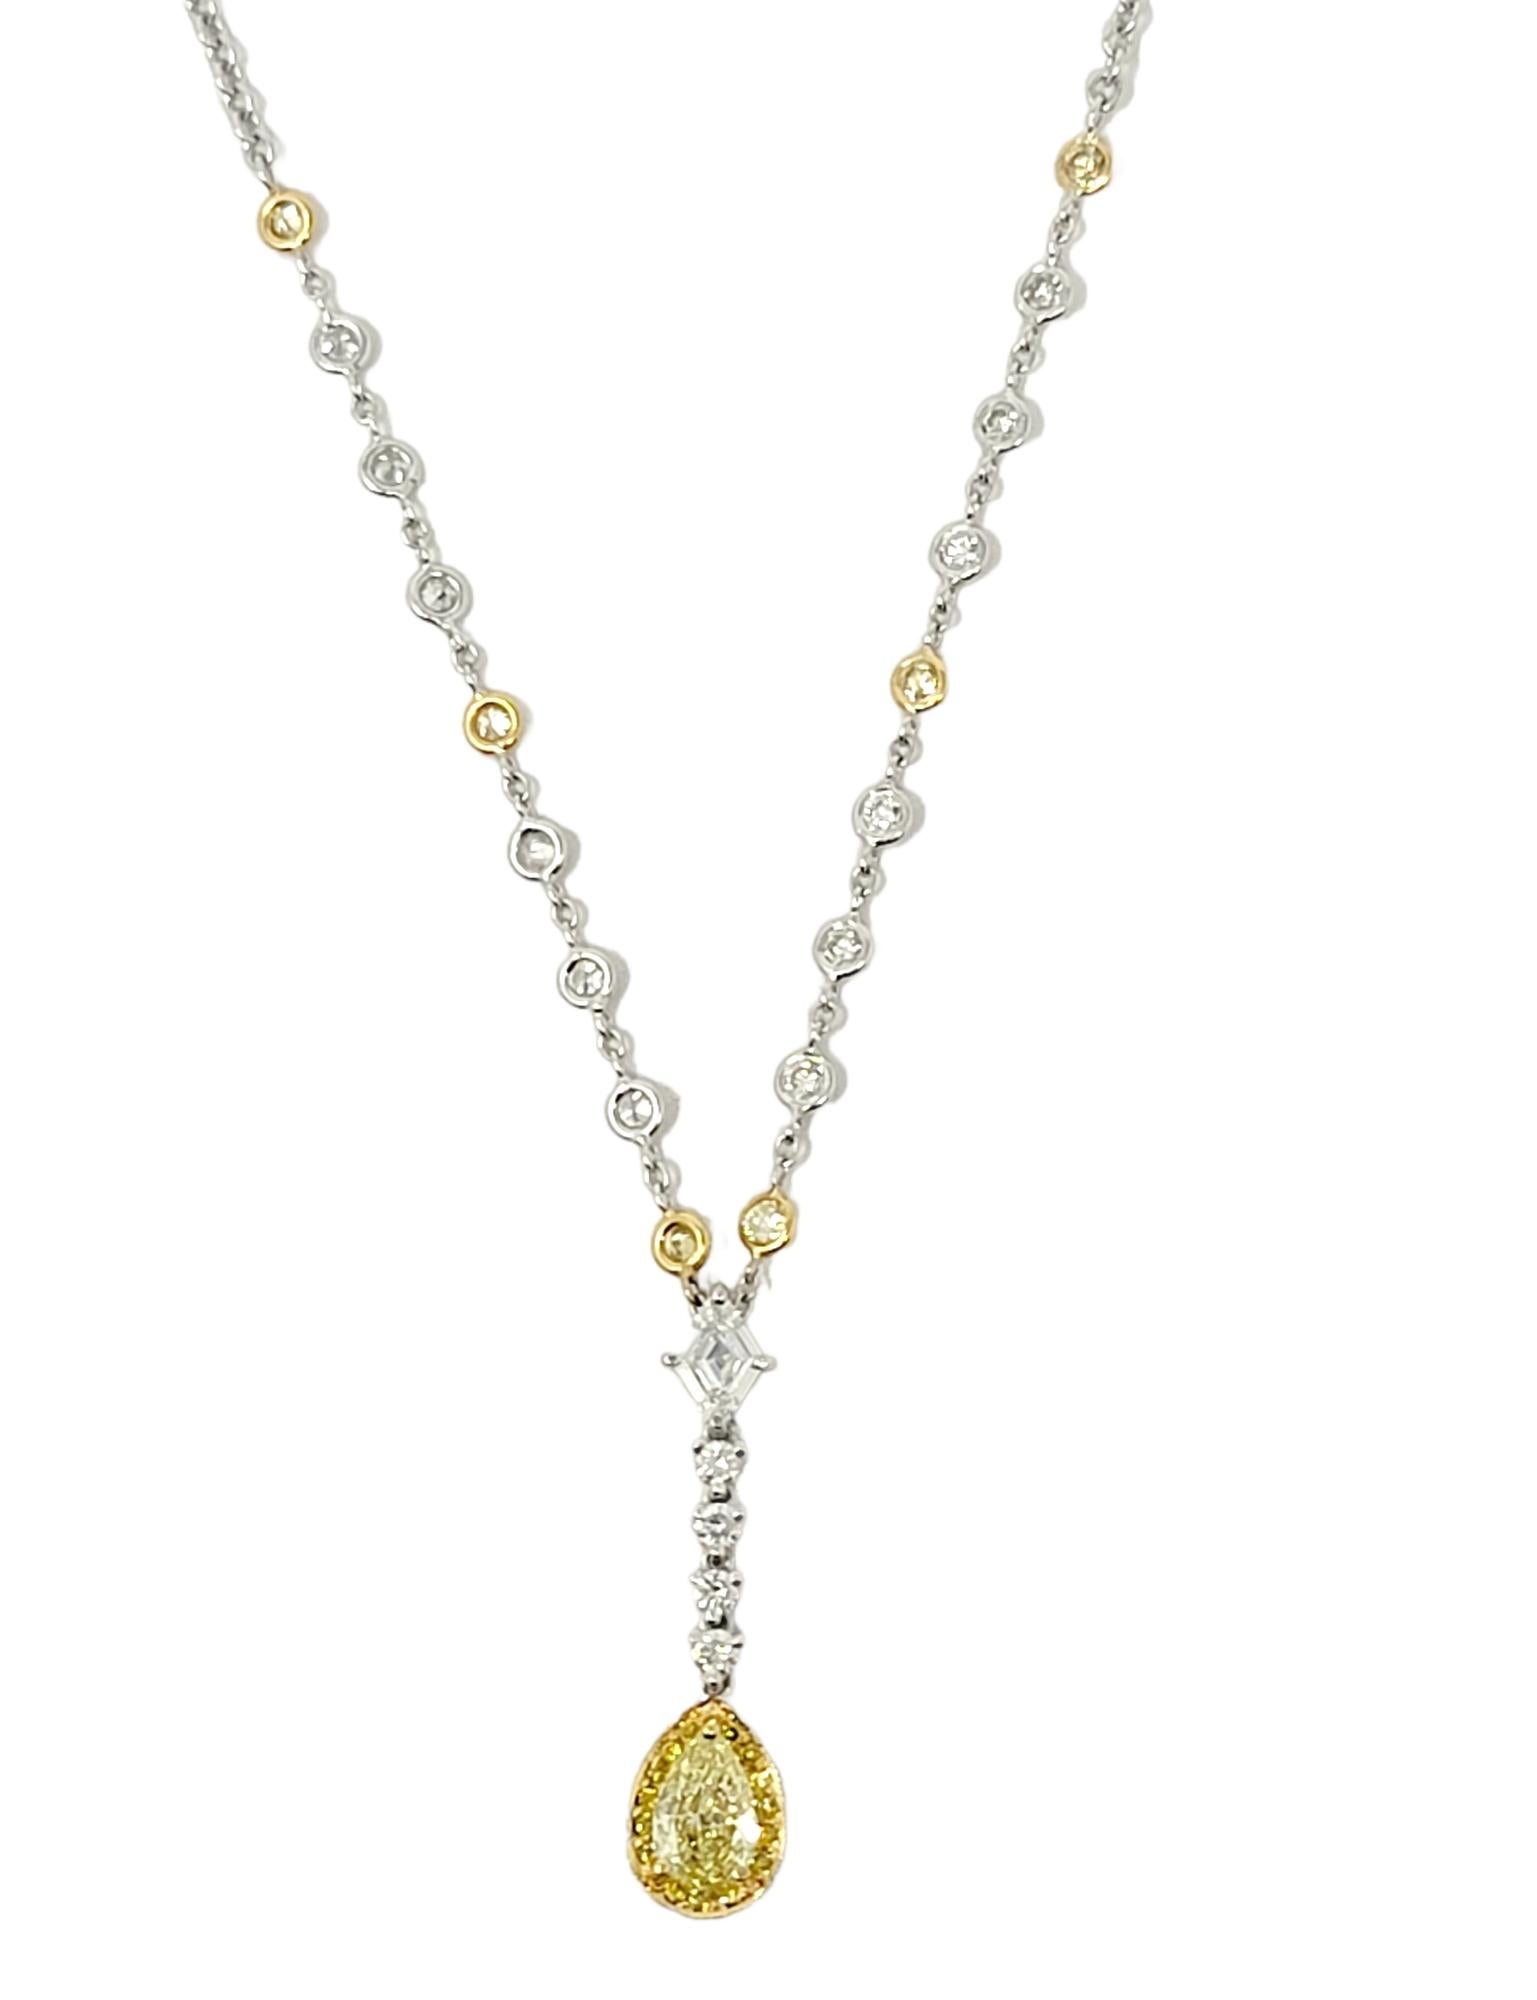 This absolutely gorgeous Gregg Ruth diamond drop necklace is simple but elegant. Featuring two-toned diamonds and gold, this delicate piece enhances anything that it is paired with. A simple white gold chain is accented by round bezel set yellow and